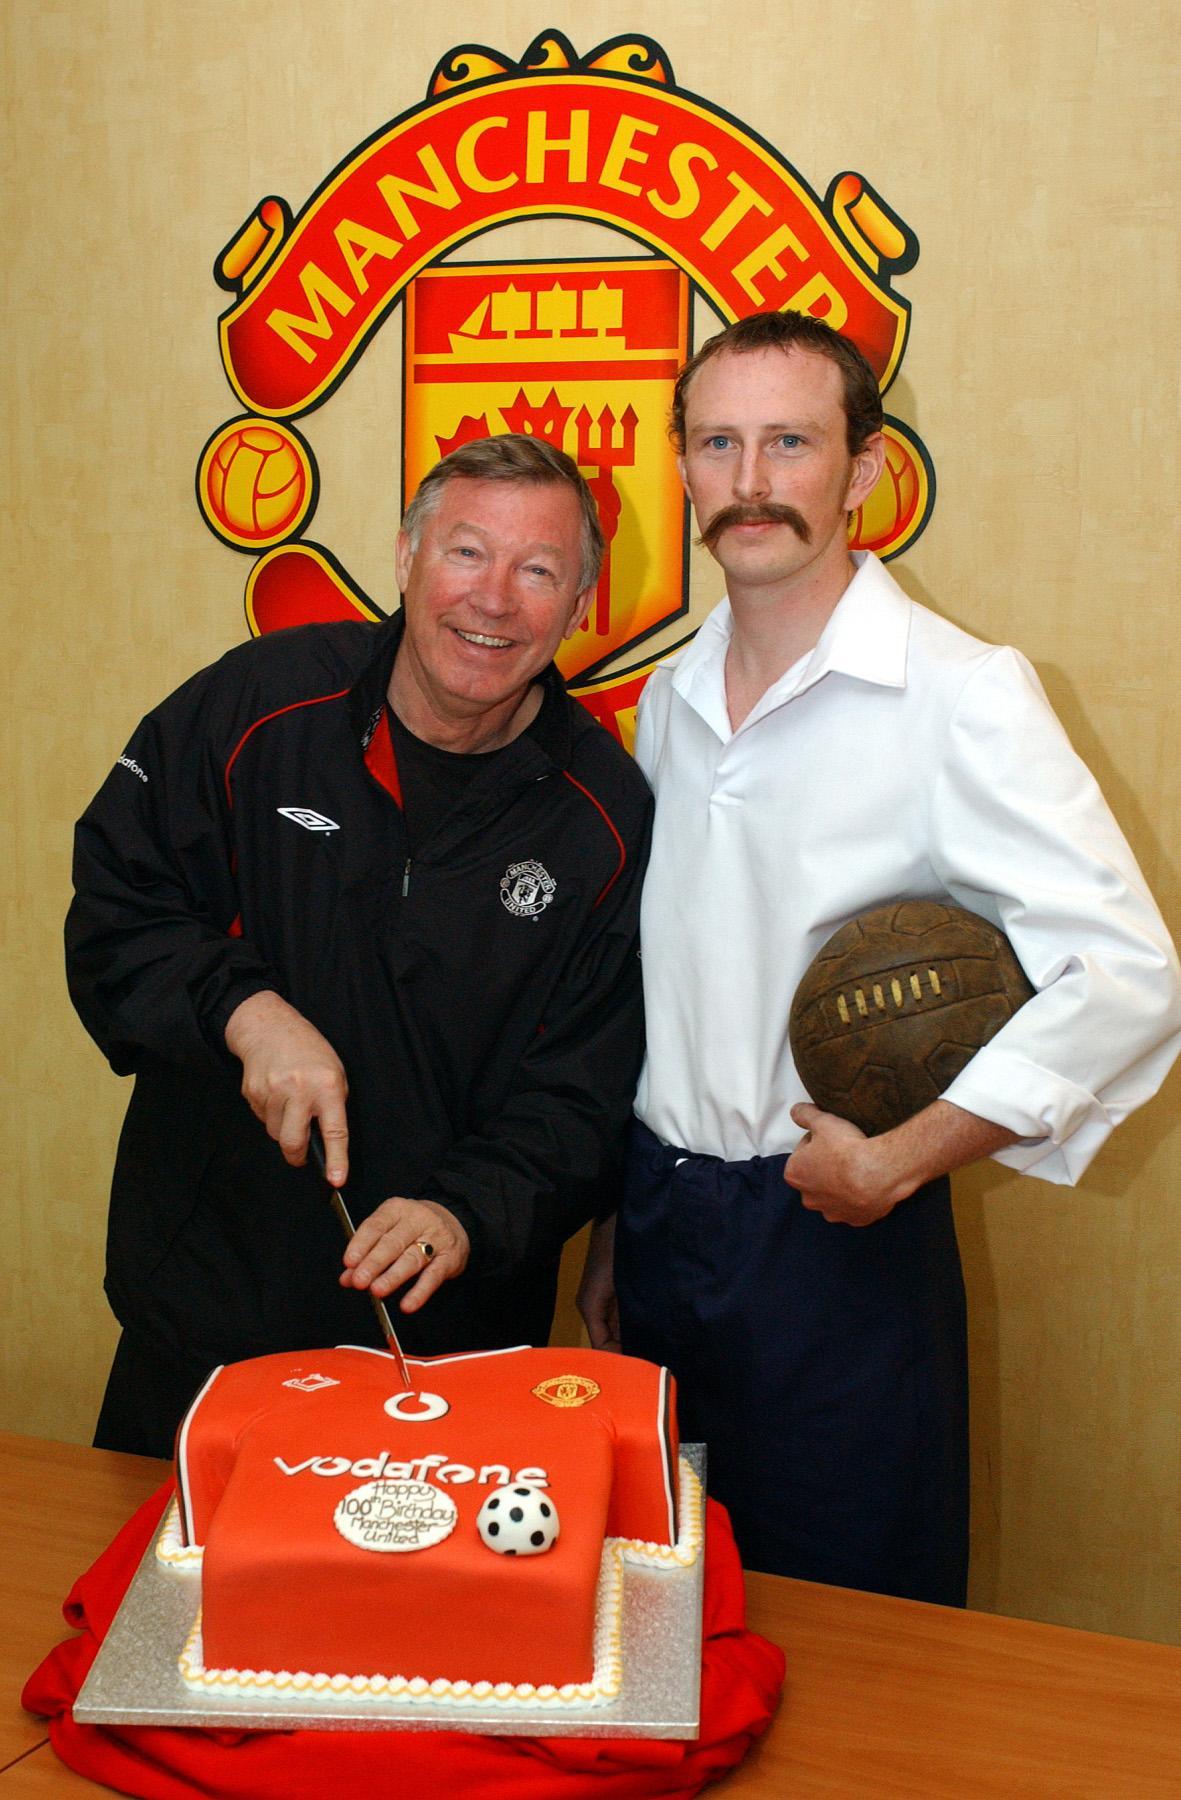 Former Manchester United manager Sir Alex Ferguson cuts a cake to mark the club's 100th anniversary